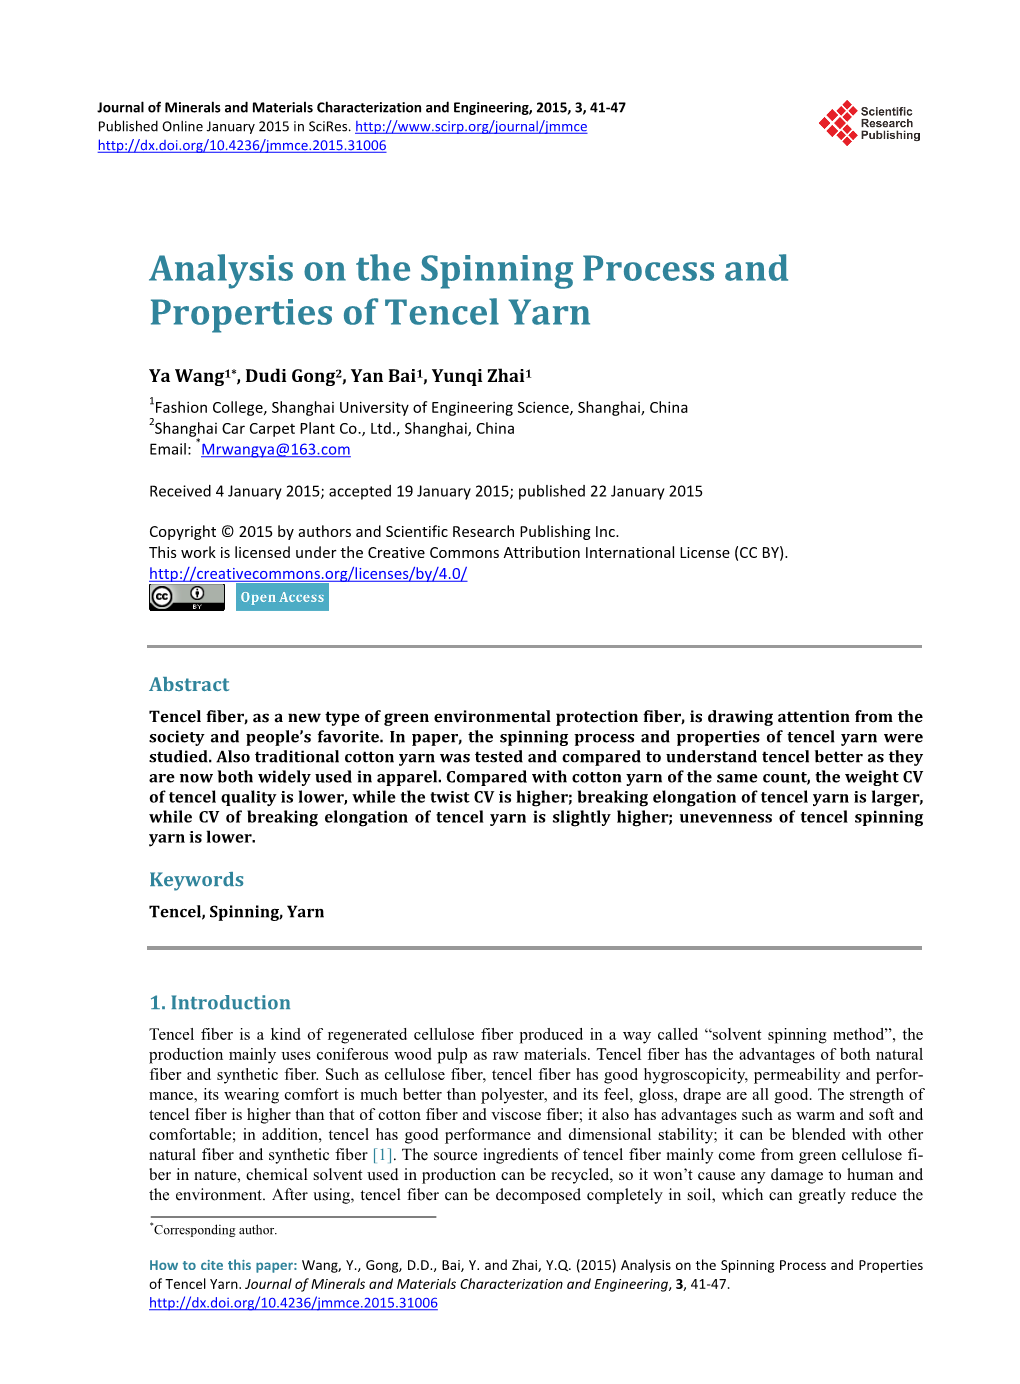 Analysis on the Spinning Process and Properties of Tencel Yarn